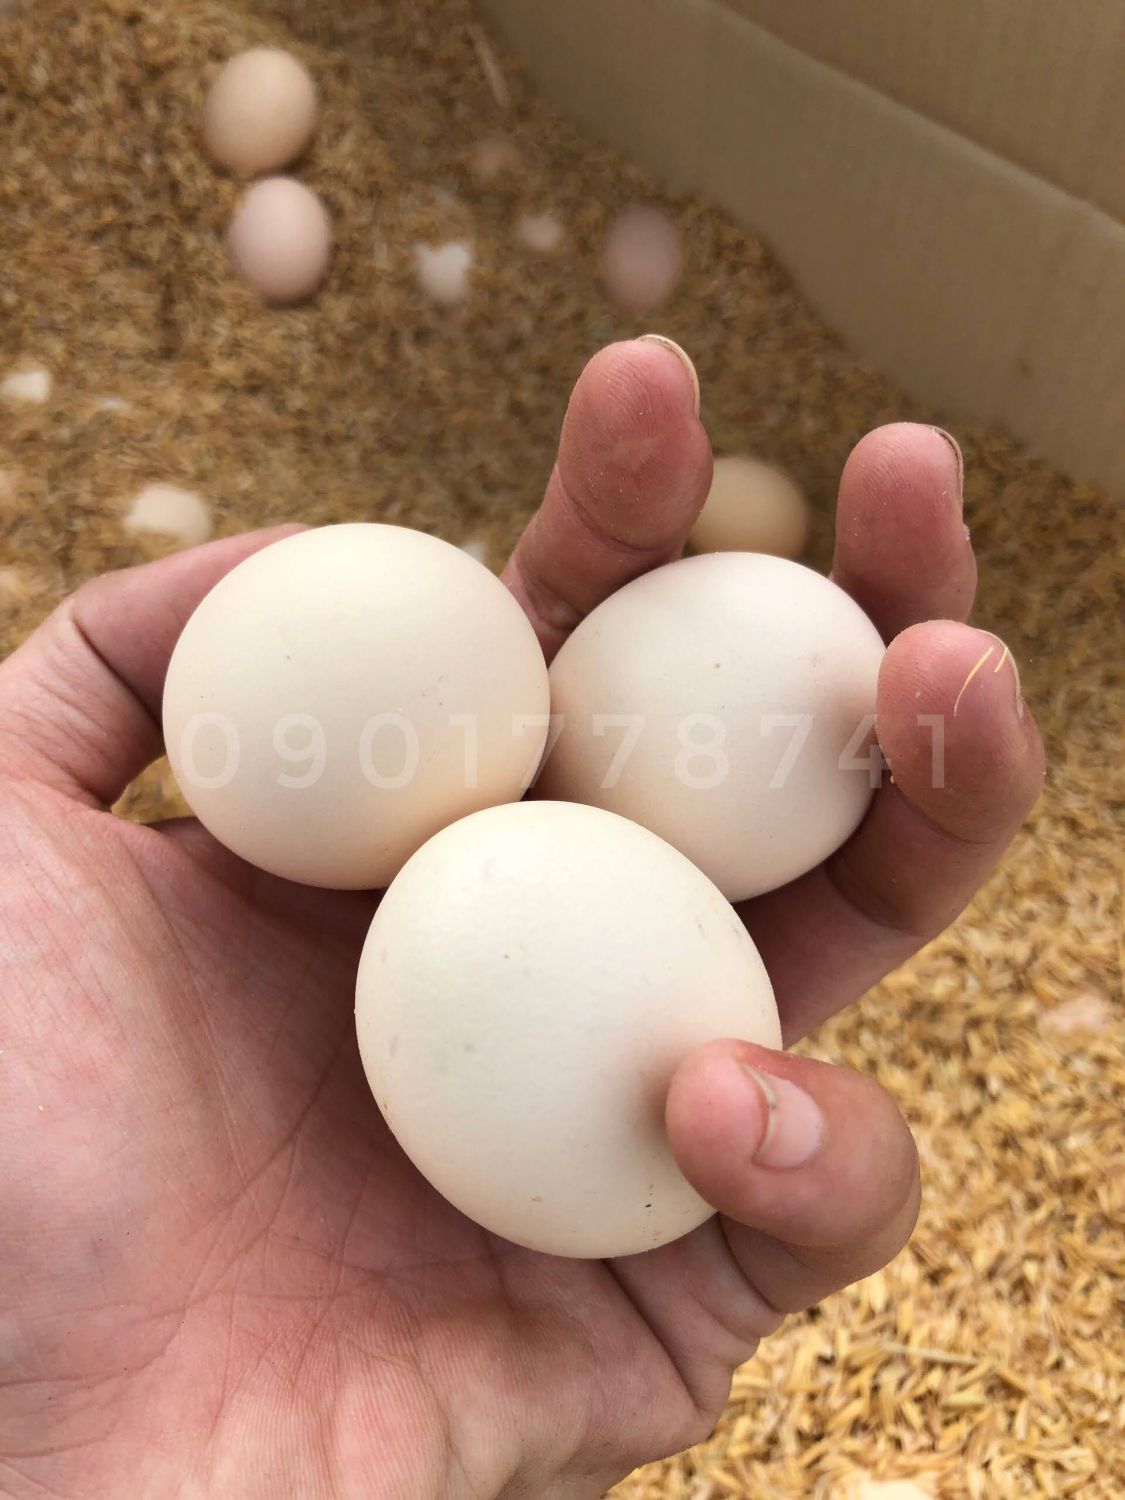 Are Silkie eggs good eating?